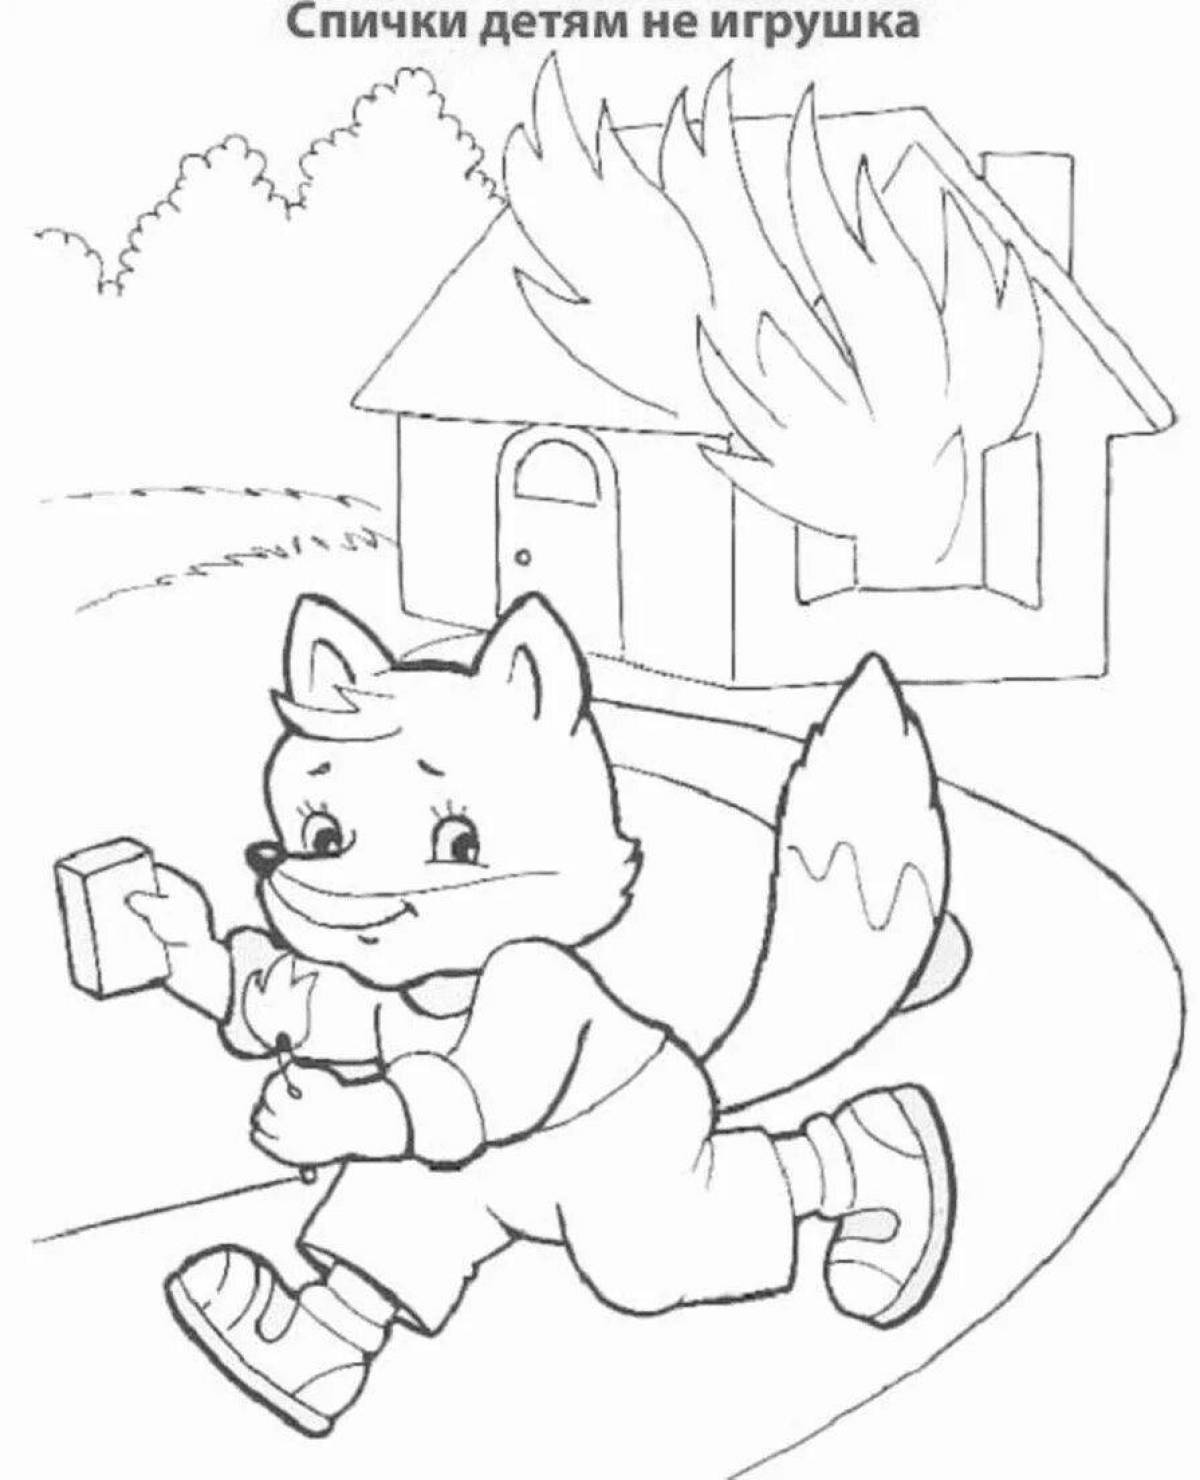 Colorful fire safety coloring page